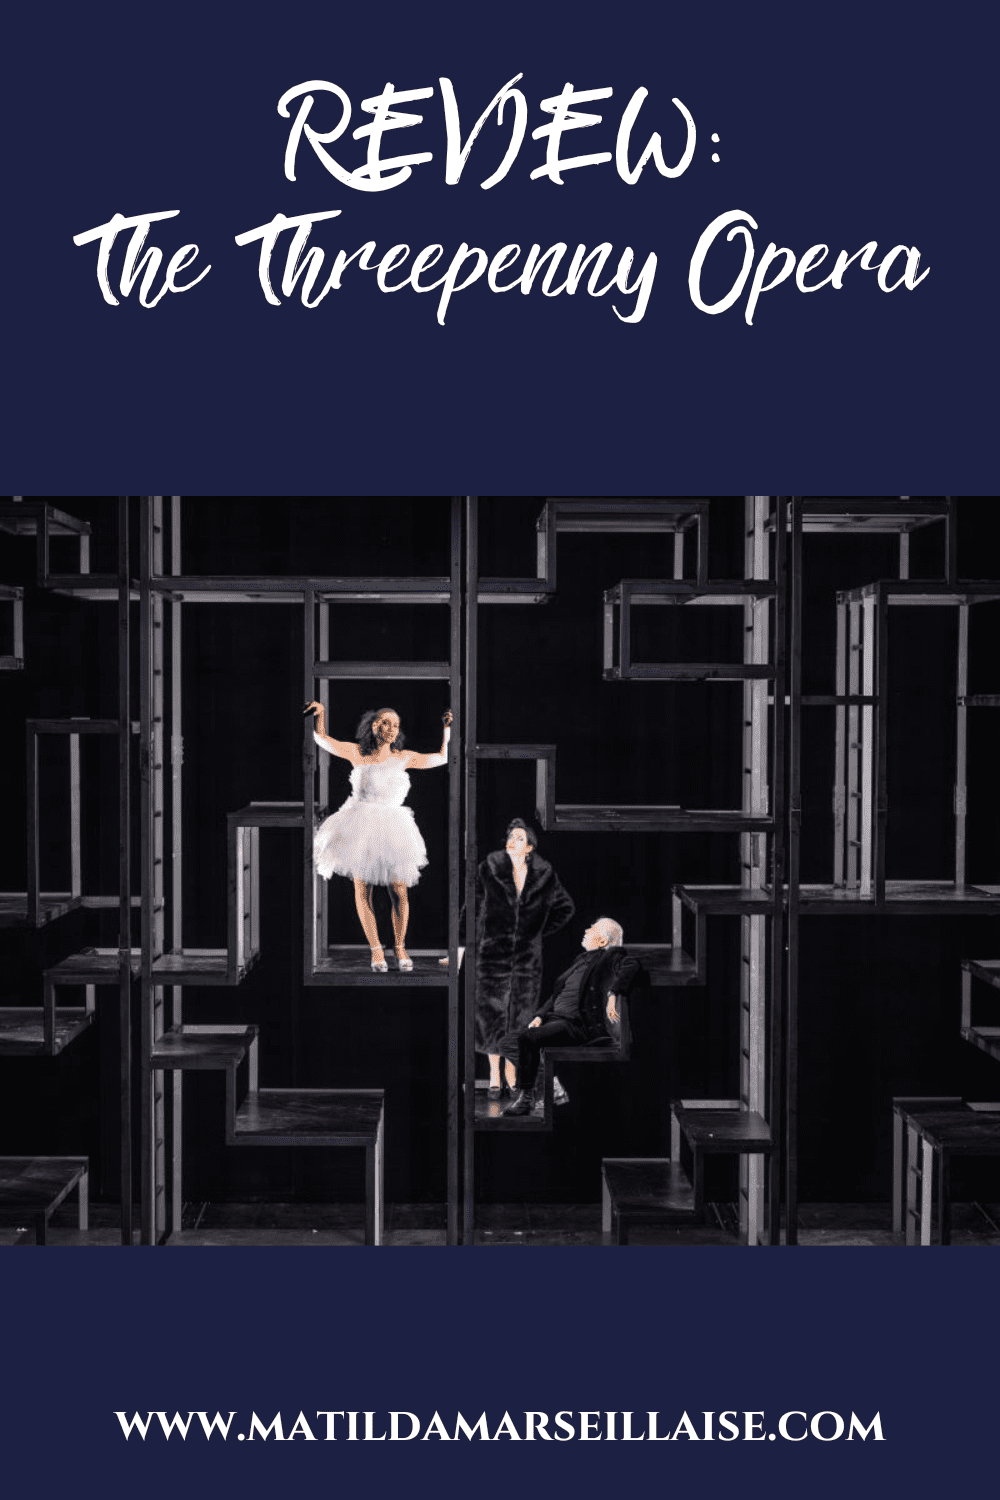 Barrie Kosky’s The Threepenny Opera is unapolagetically absurdist